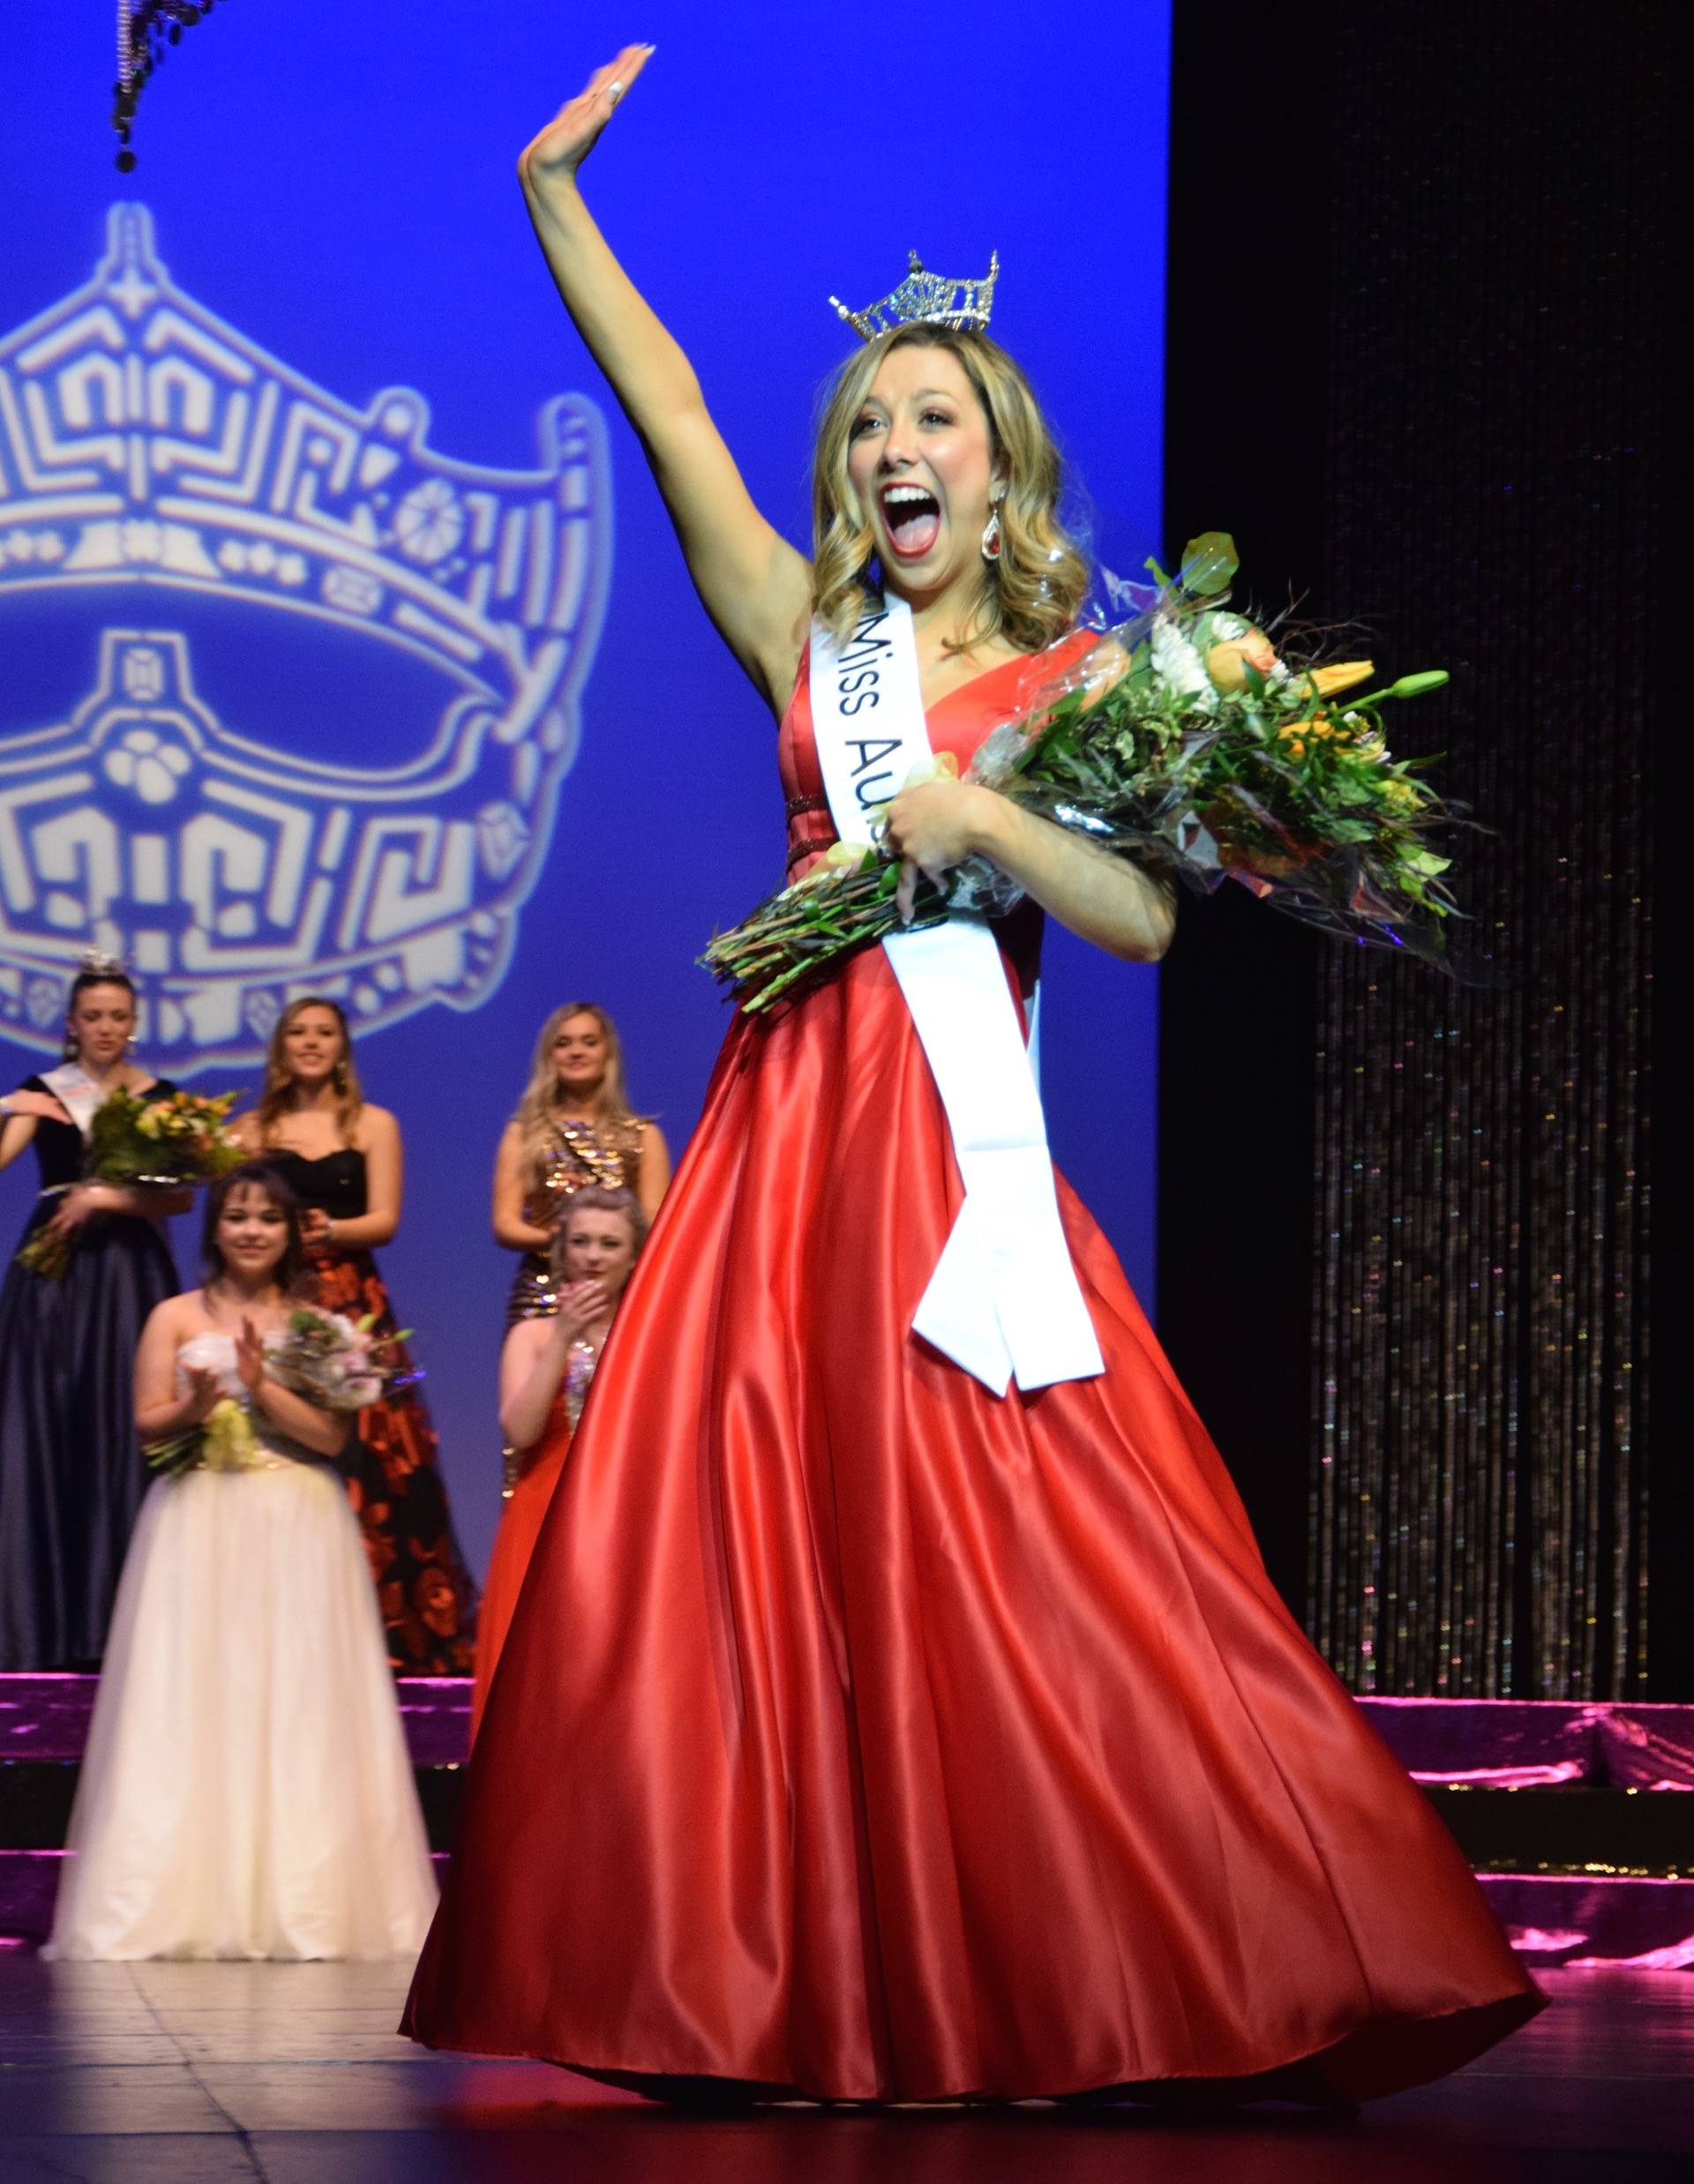 Amanda Enz waves to the audience after being chosen Miss Auburn for 2019 at the scholarship program at the Auburn Performing Arts Center on Saturday night. RACHEL CIAMPI, Auburn Reporter